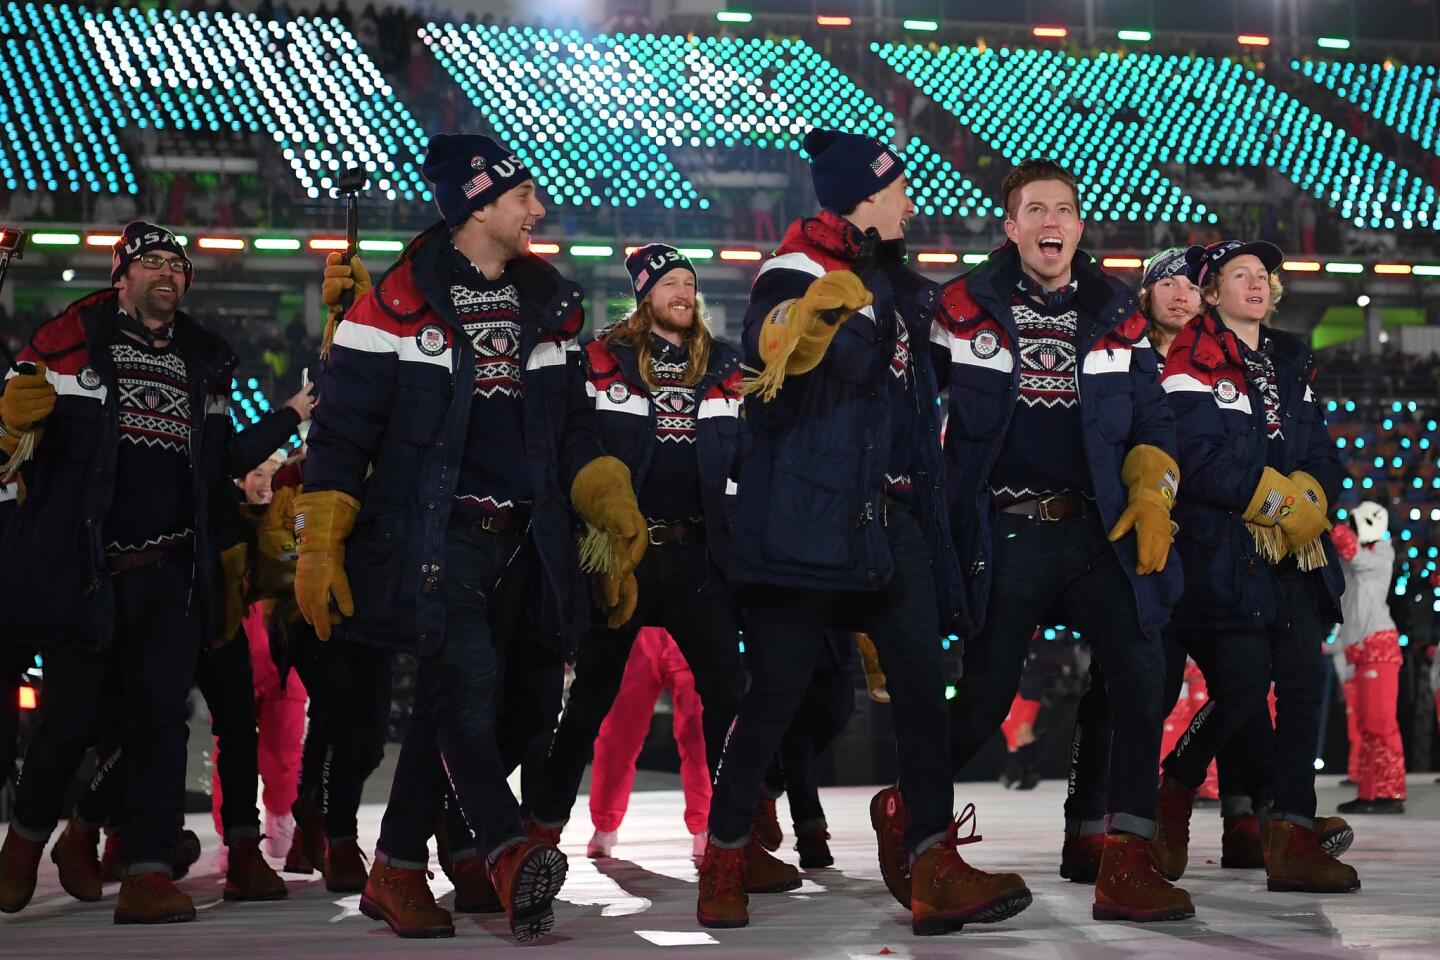 U.S. athletes take part in the Opening Ceremony at PyeongChang Olympic Stadium.